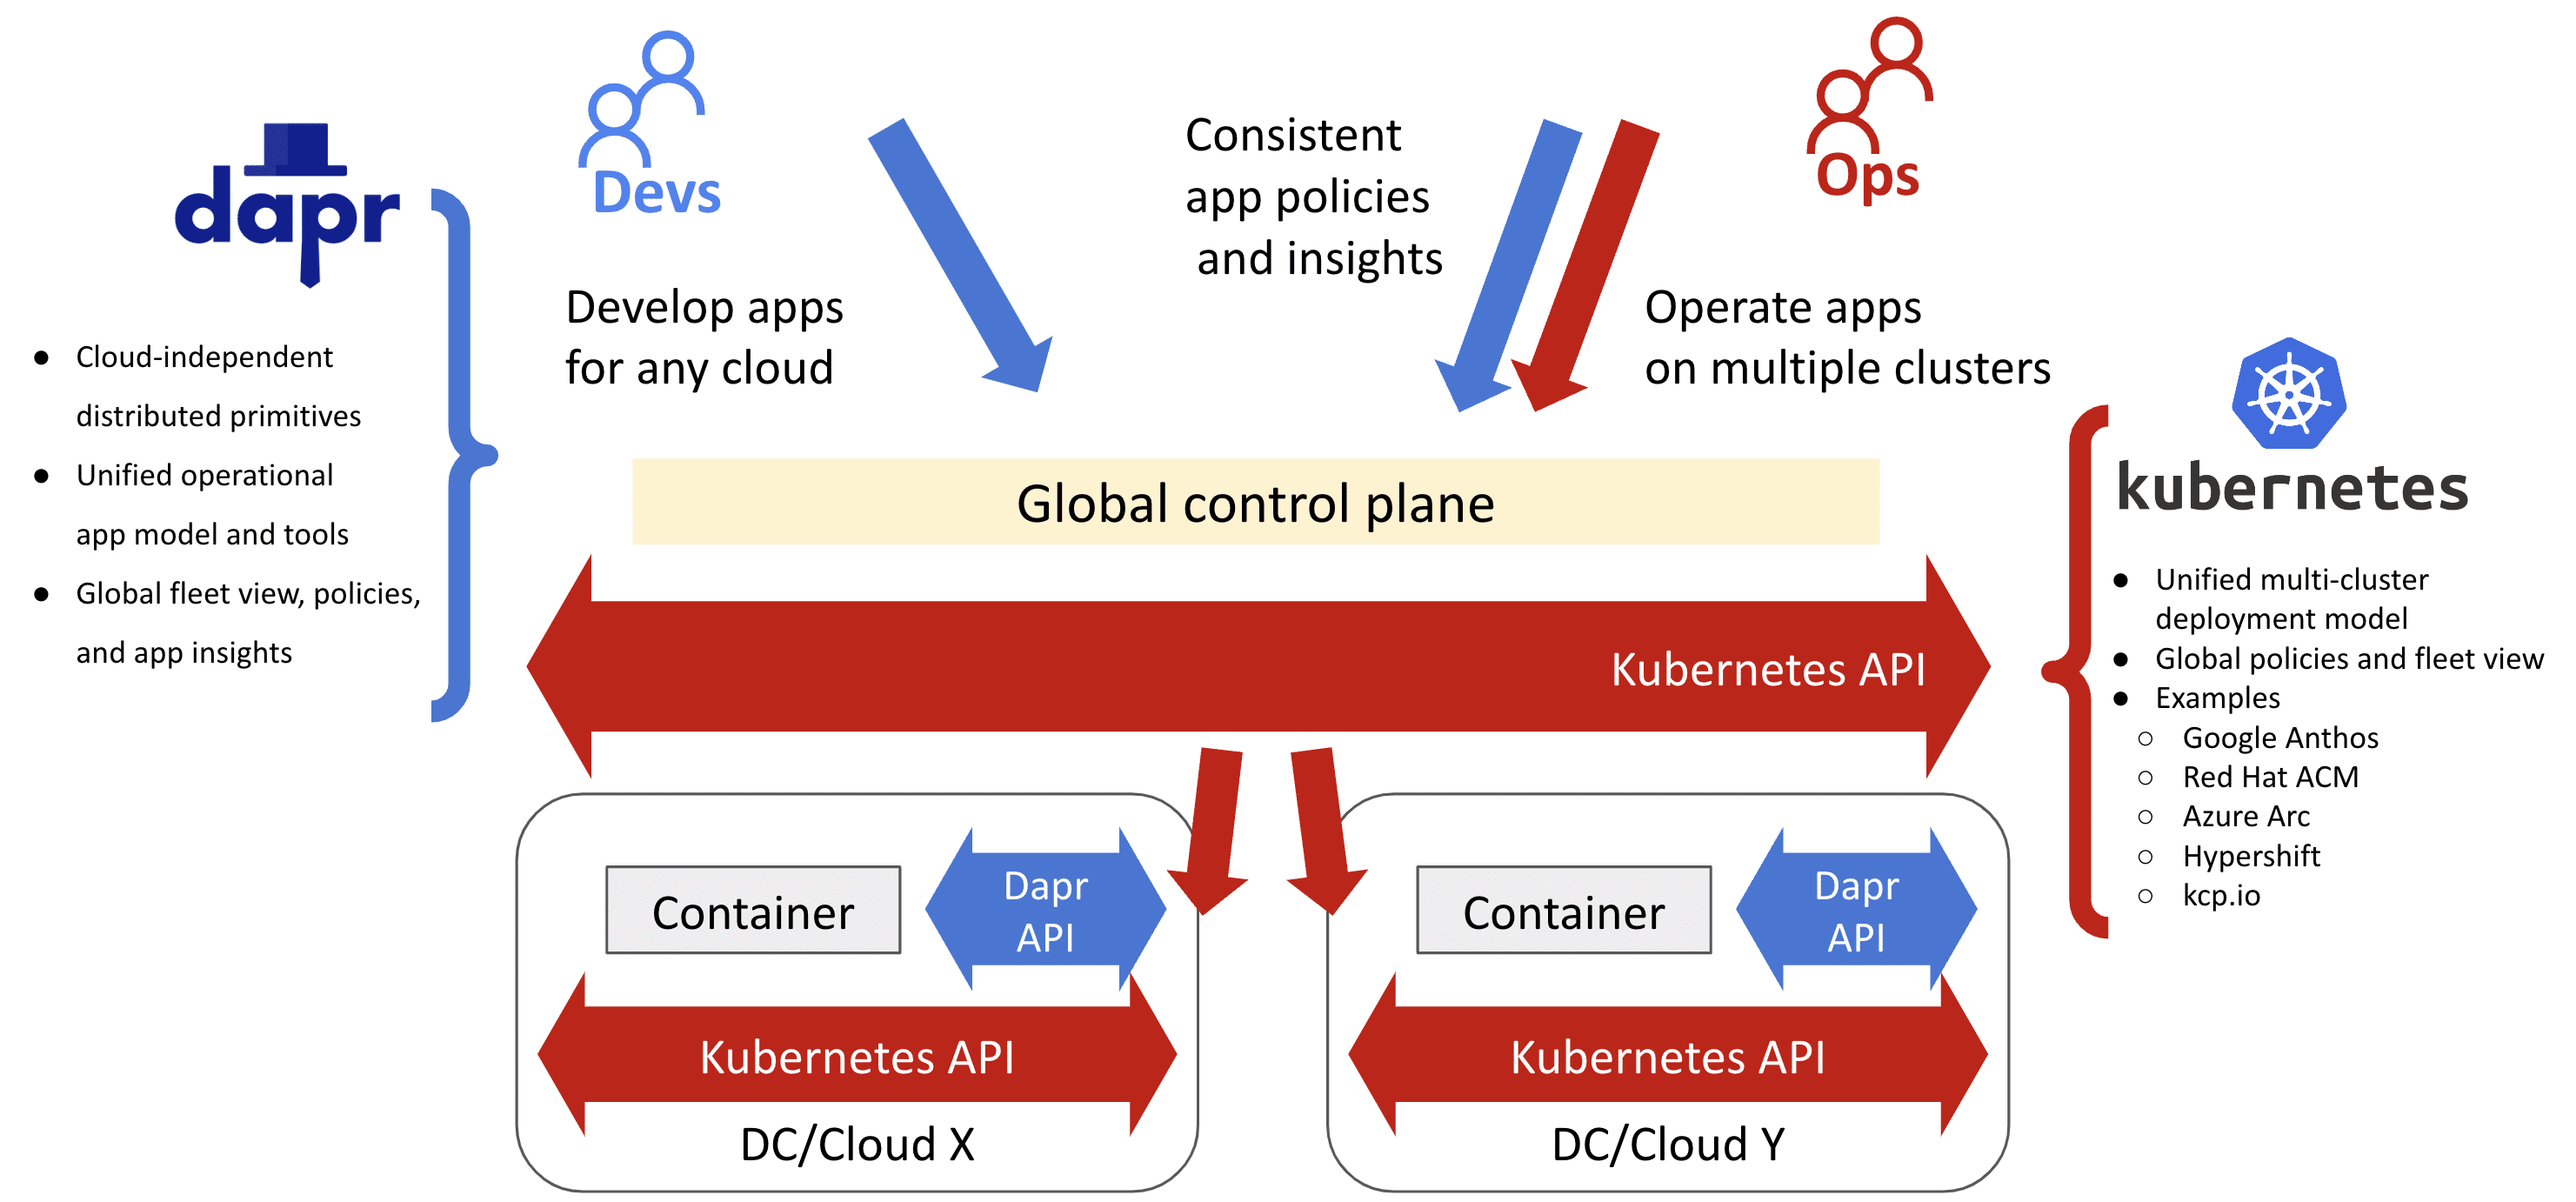 Dapr helps Devs create multi-cloud applications that Ops can operate through Kubernetes APIs